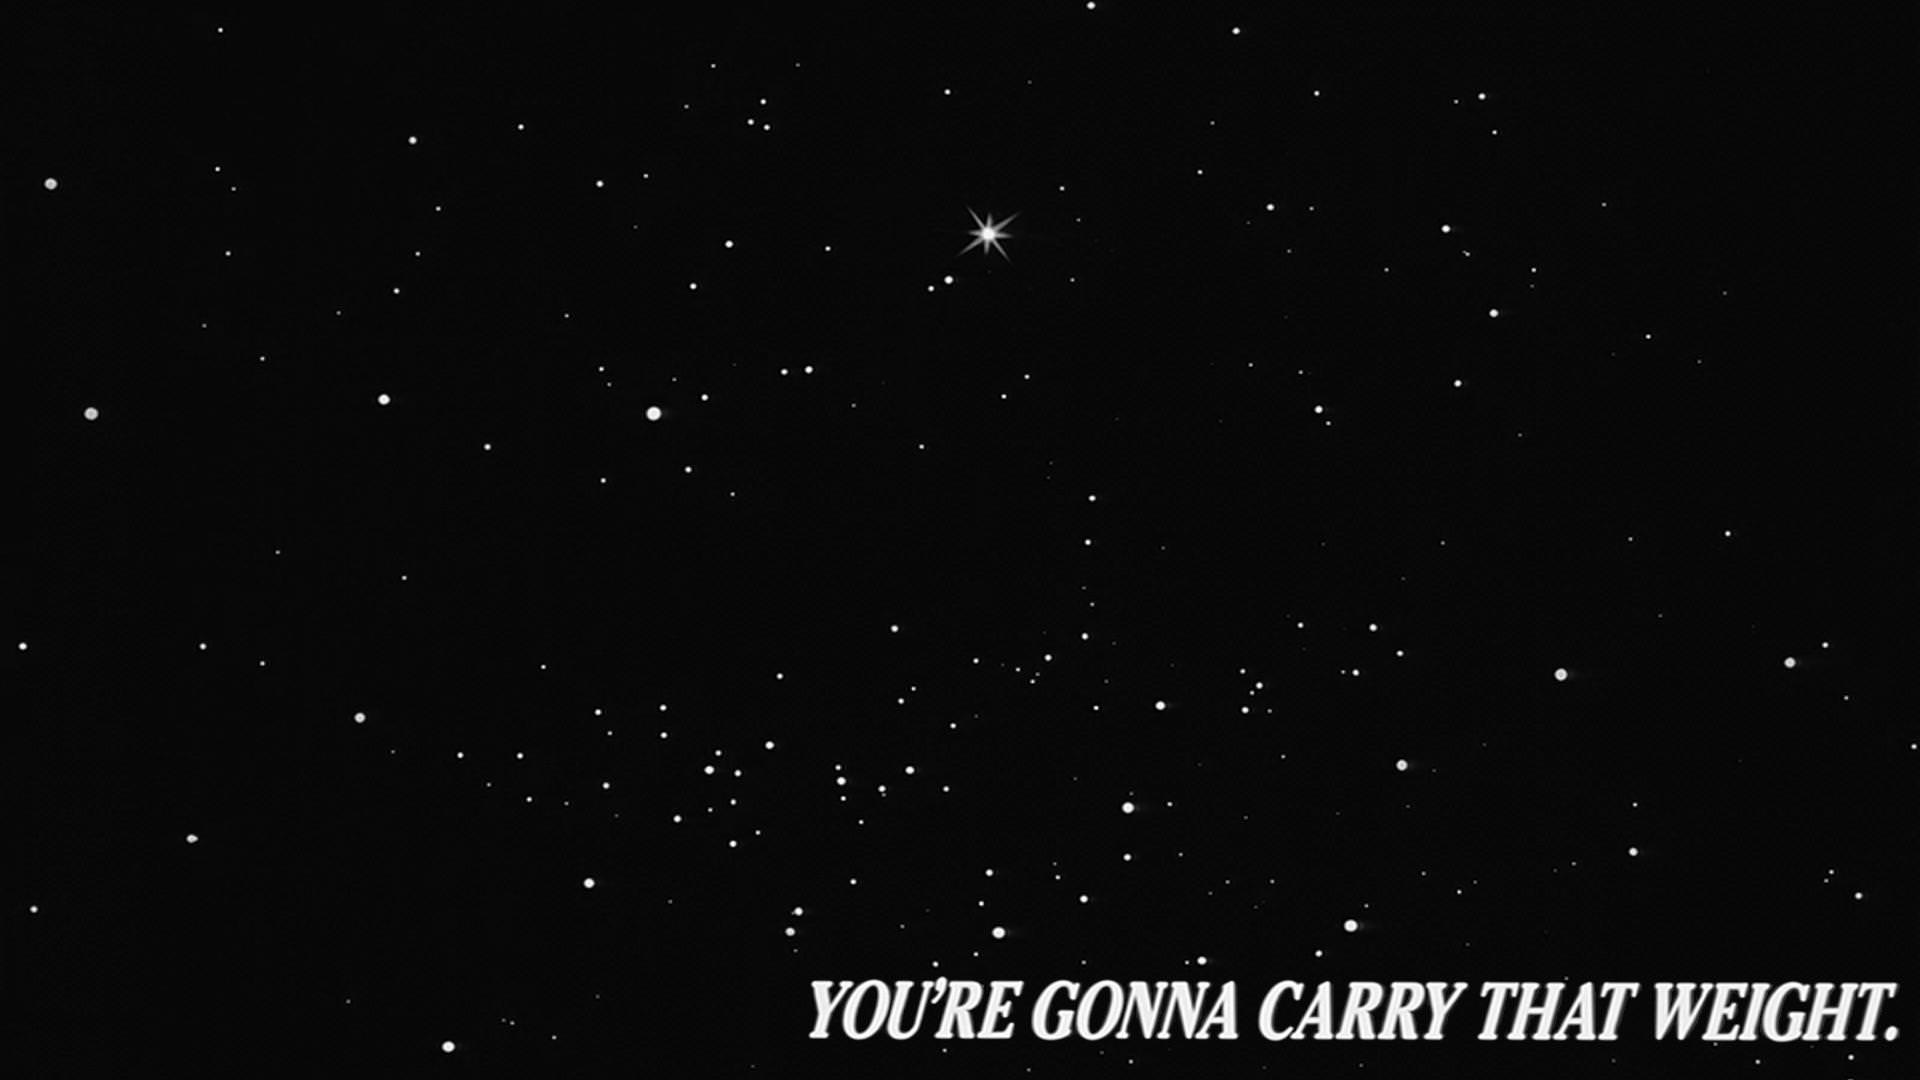 Anime 1920x1080 Cowboy Bebop you're gonna carry that weight minimalism quote